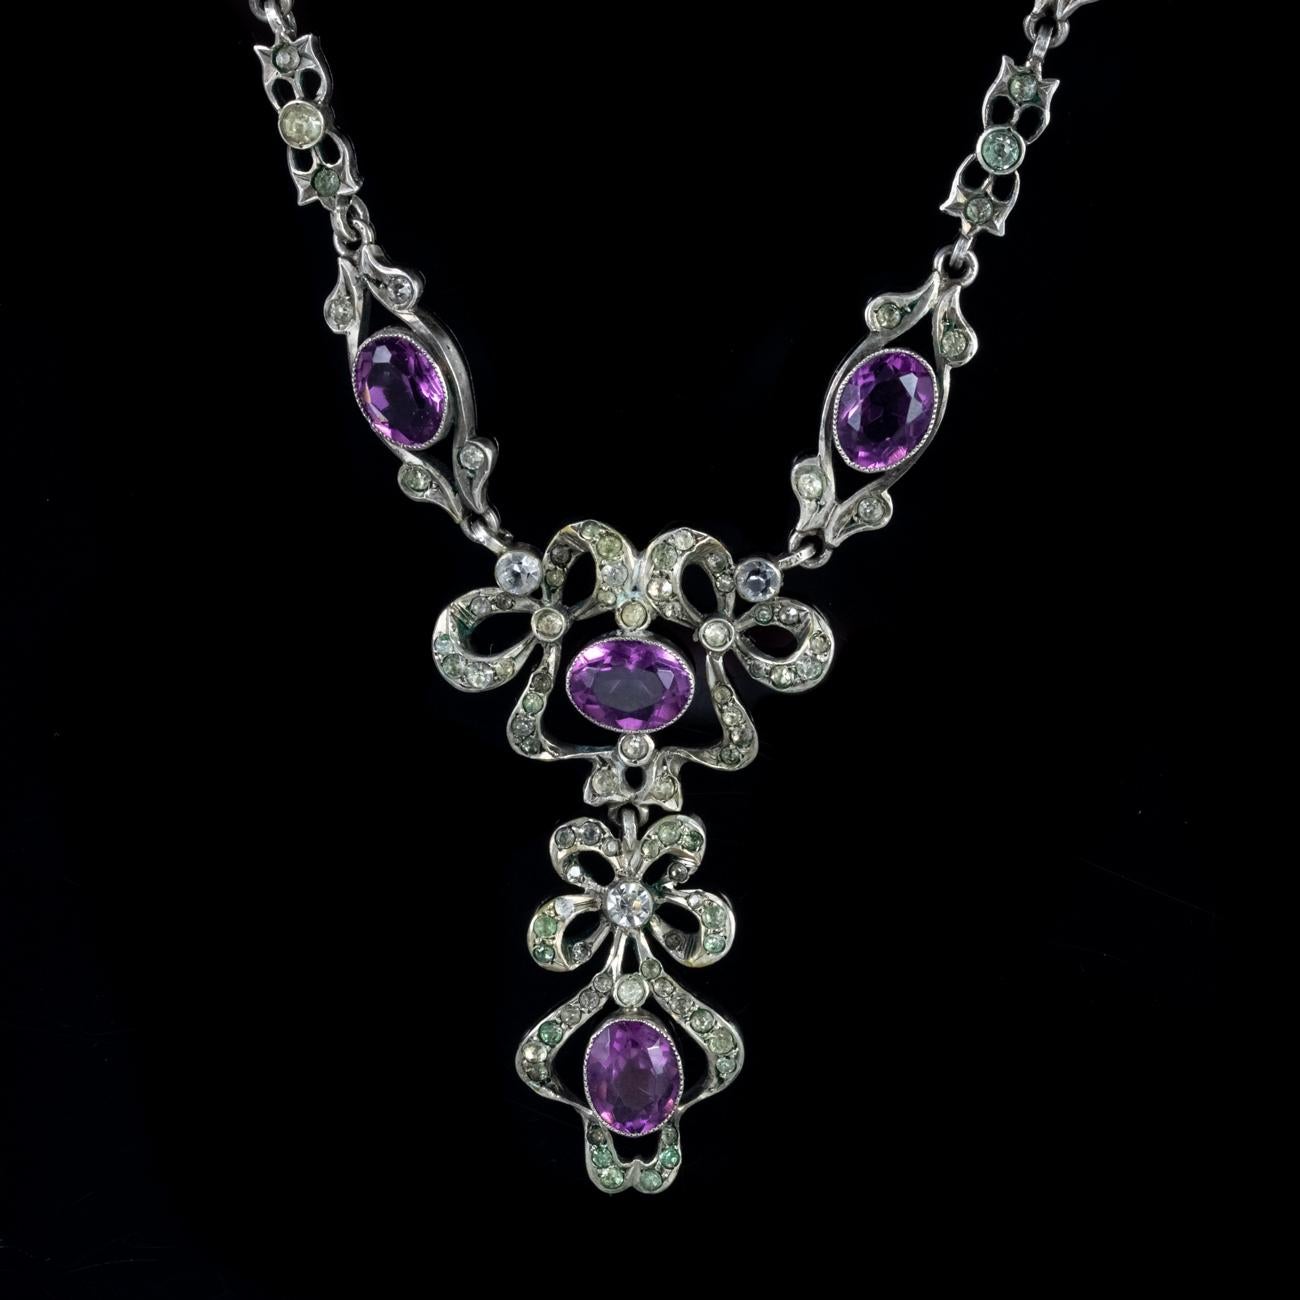 This beautiful Antique Victorian Suffragette necklace has been commissioned in Silver and set with an array of coloured Paste stones. The larger Paste stones weigh approx. 1.75ct each and are purple, with the smaller stones being white and